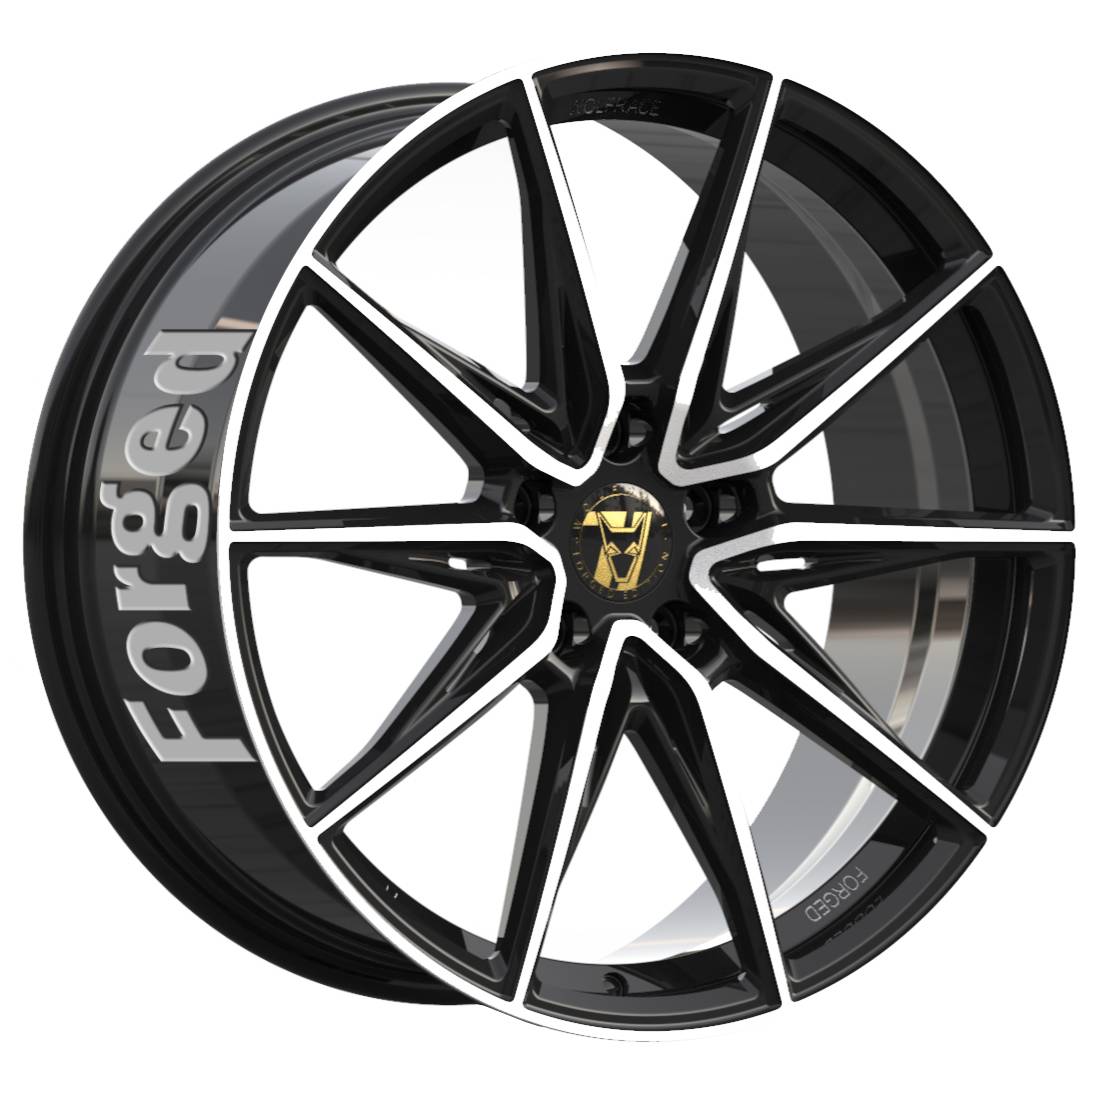 Jantes alu Demon Wheels 71 Forged Edition Urban Racer Forged [11.5x24] -5x130- ET 20